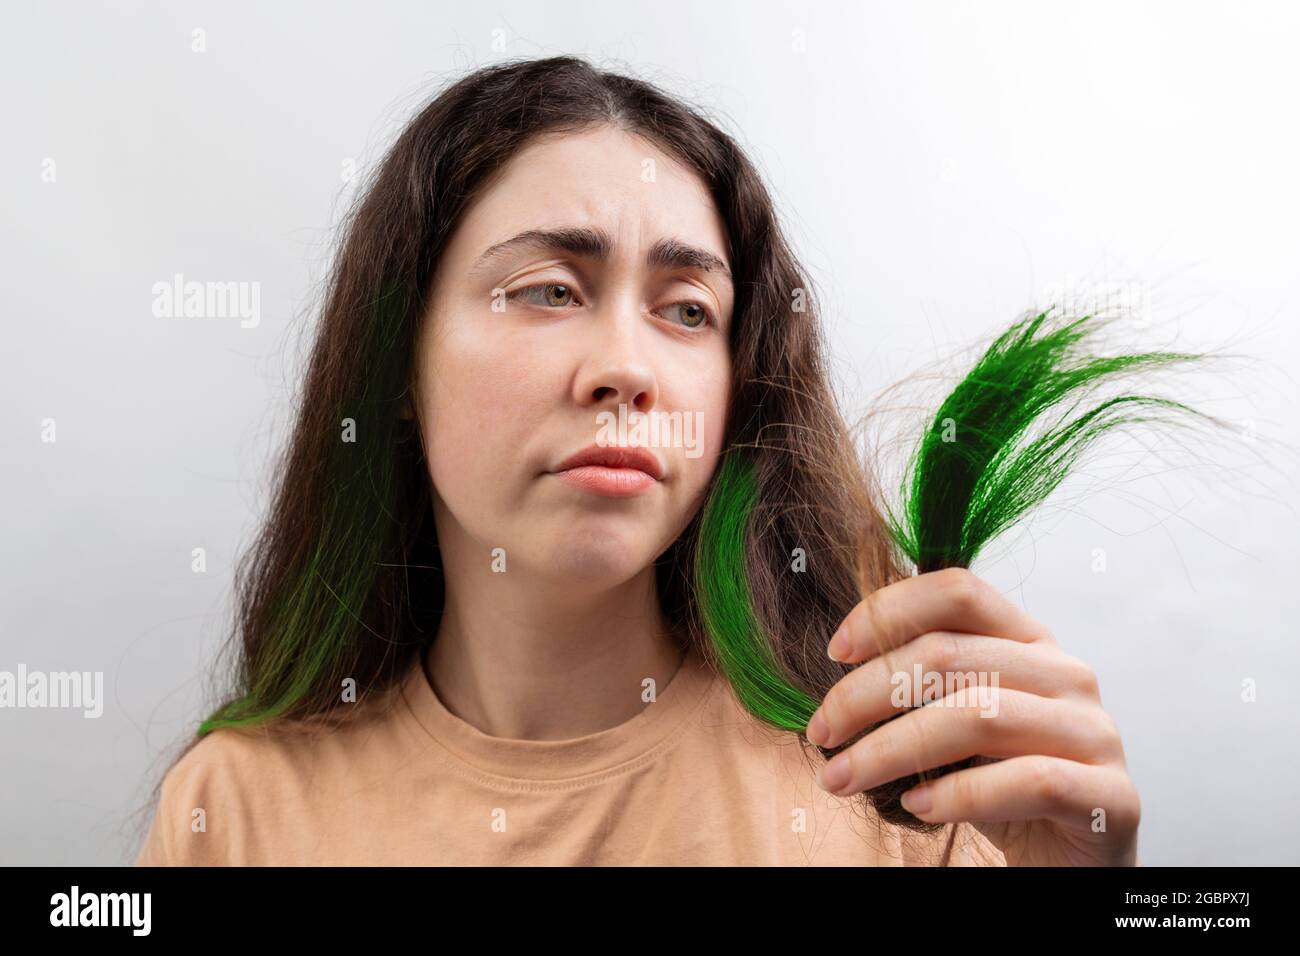 Hair coloring. A young Caucasian woman in a beige t-shirt looks distressed at the green tips of her long hair. White background. Stock Photo